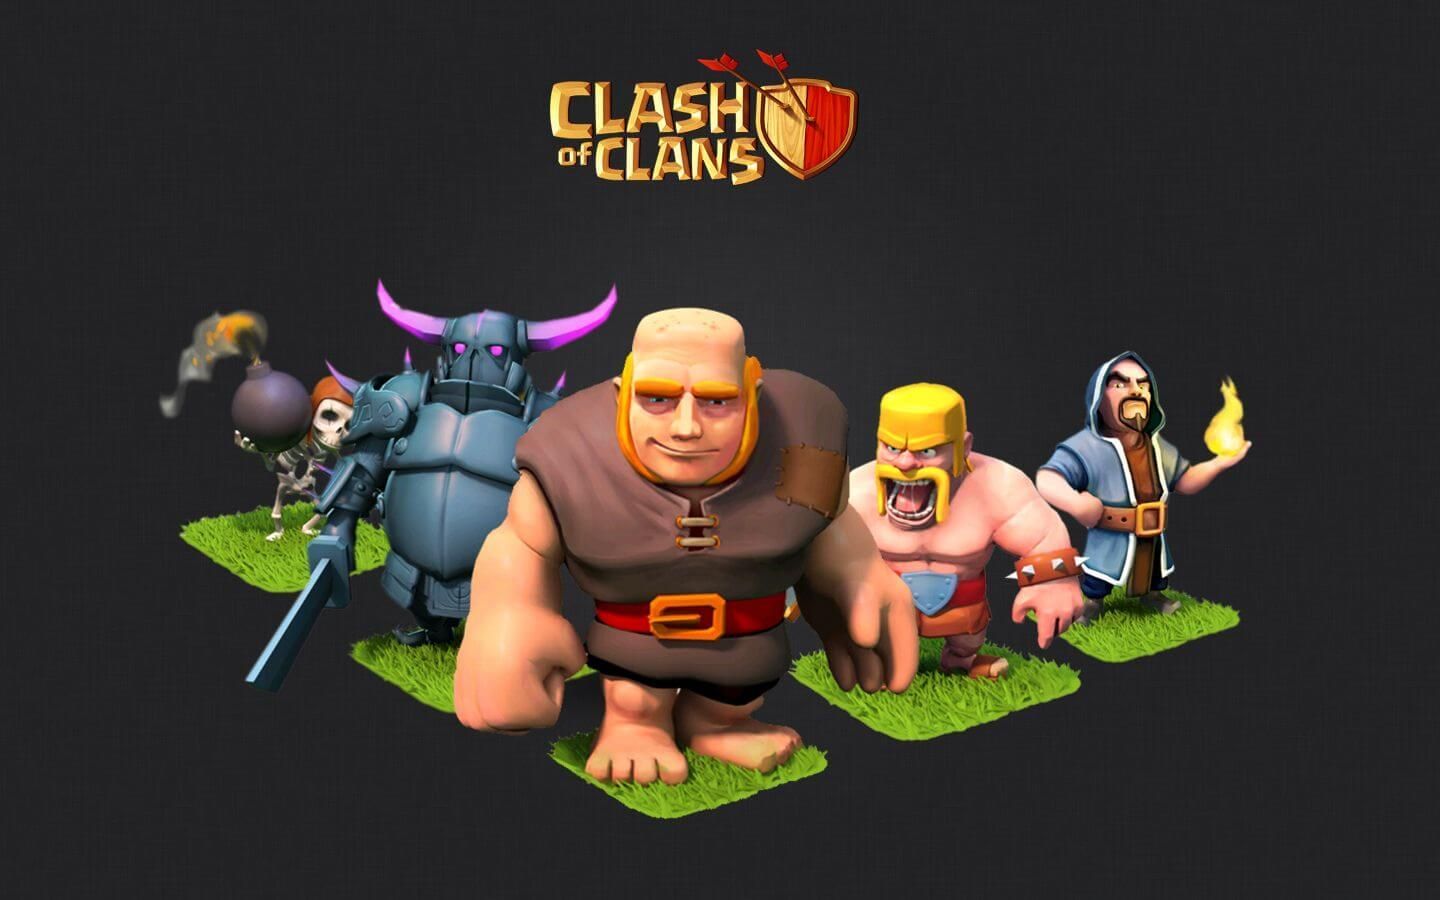 Clash Of Clans Wallpaper and Photo 4K Full HD #ClashofClans #ClashofClansWallpaper #GameWallpaper. Clash of clans, Clash of clans game, Clan